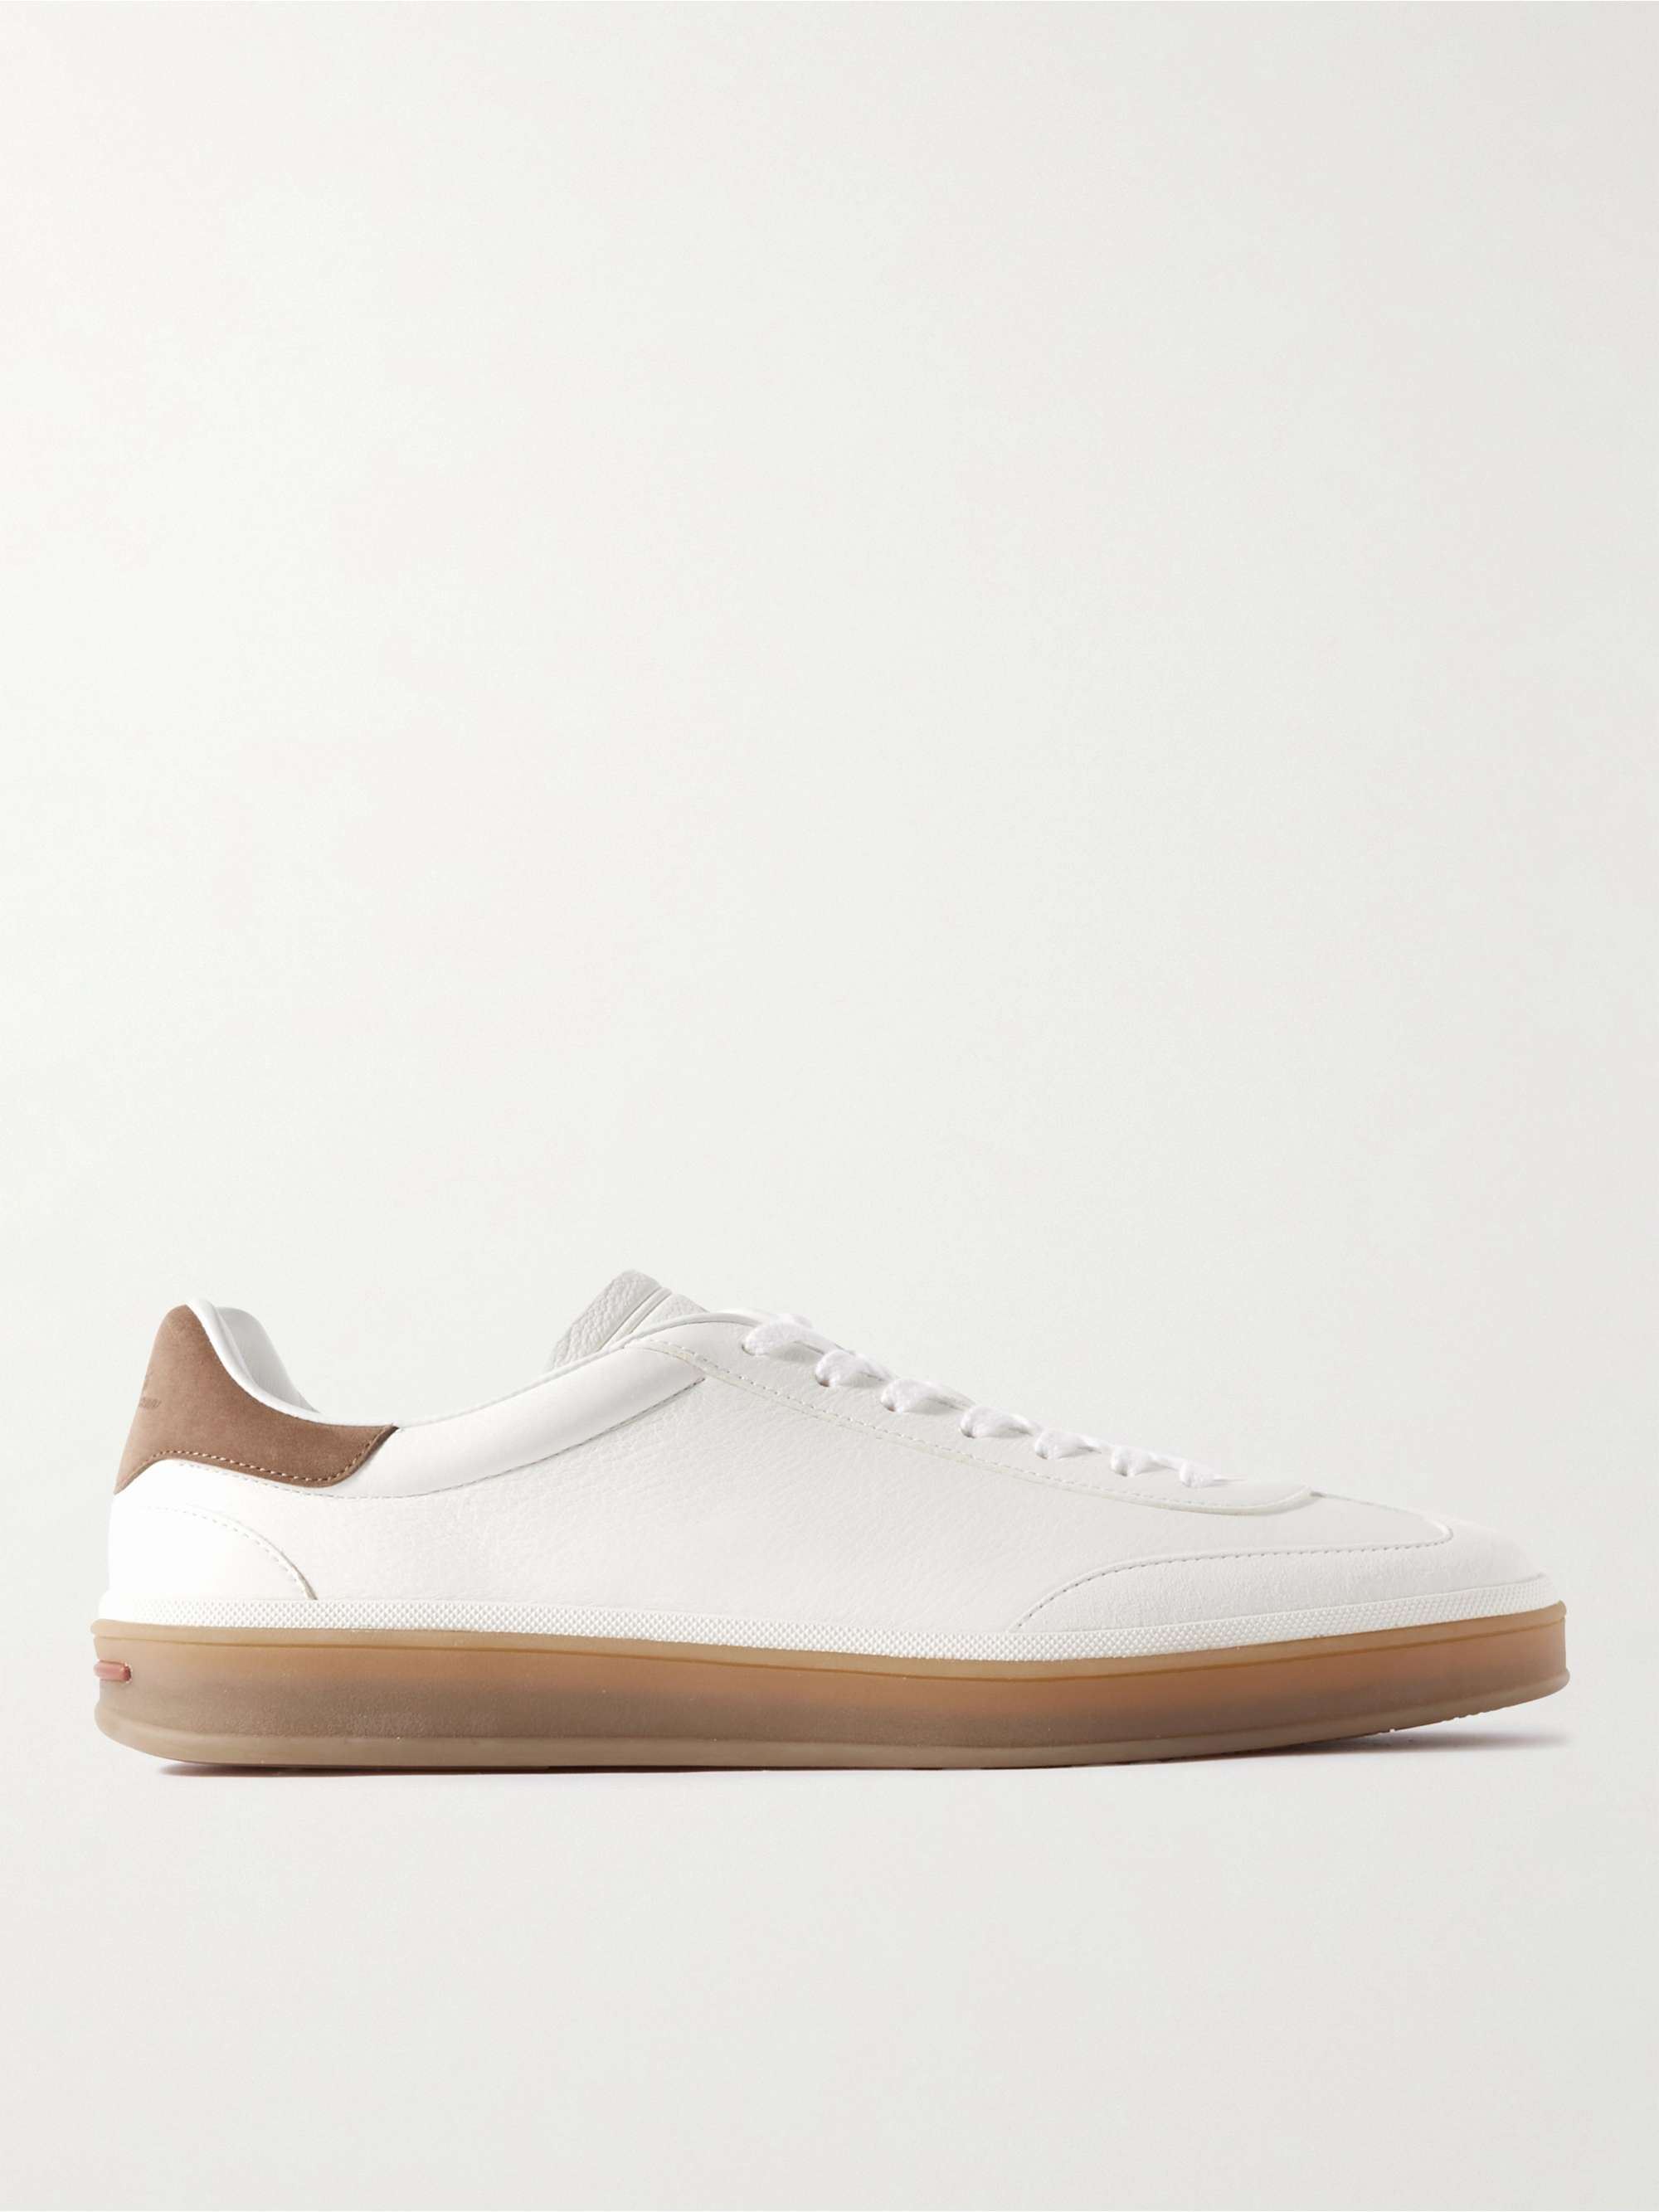 LORO PIANA Tennis Walk Suede-Trimmed Leather Sneakers for Men | MR PORTER